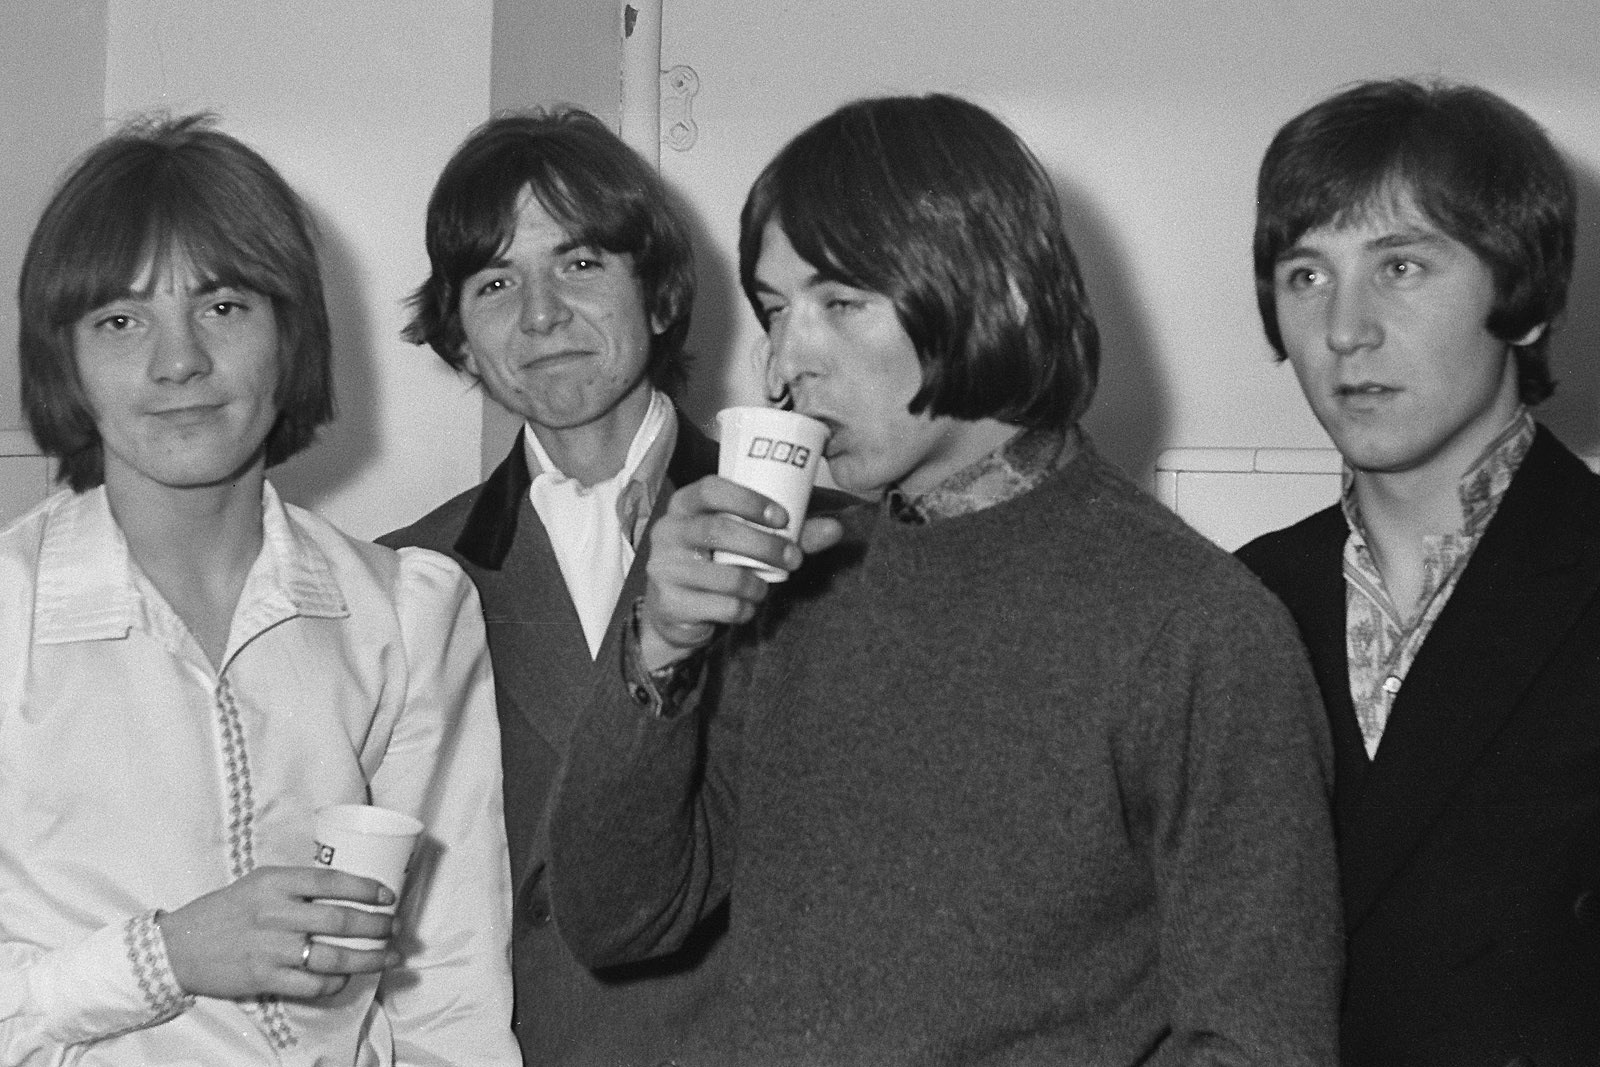 How Small Faces Hit Was 'Nail in the Coffin'